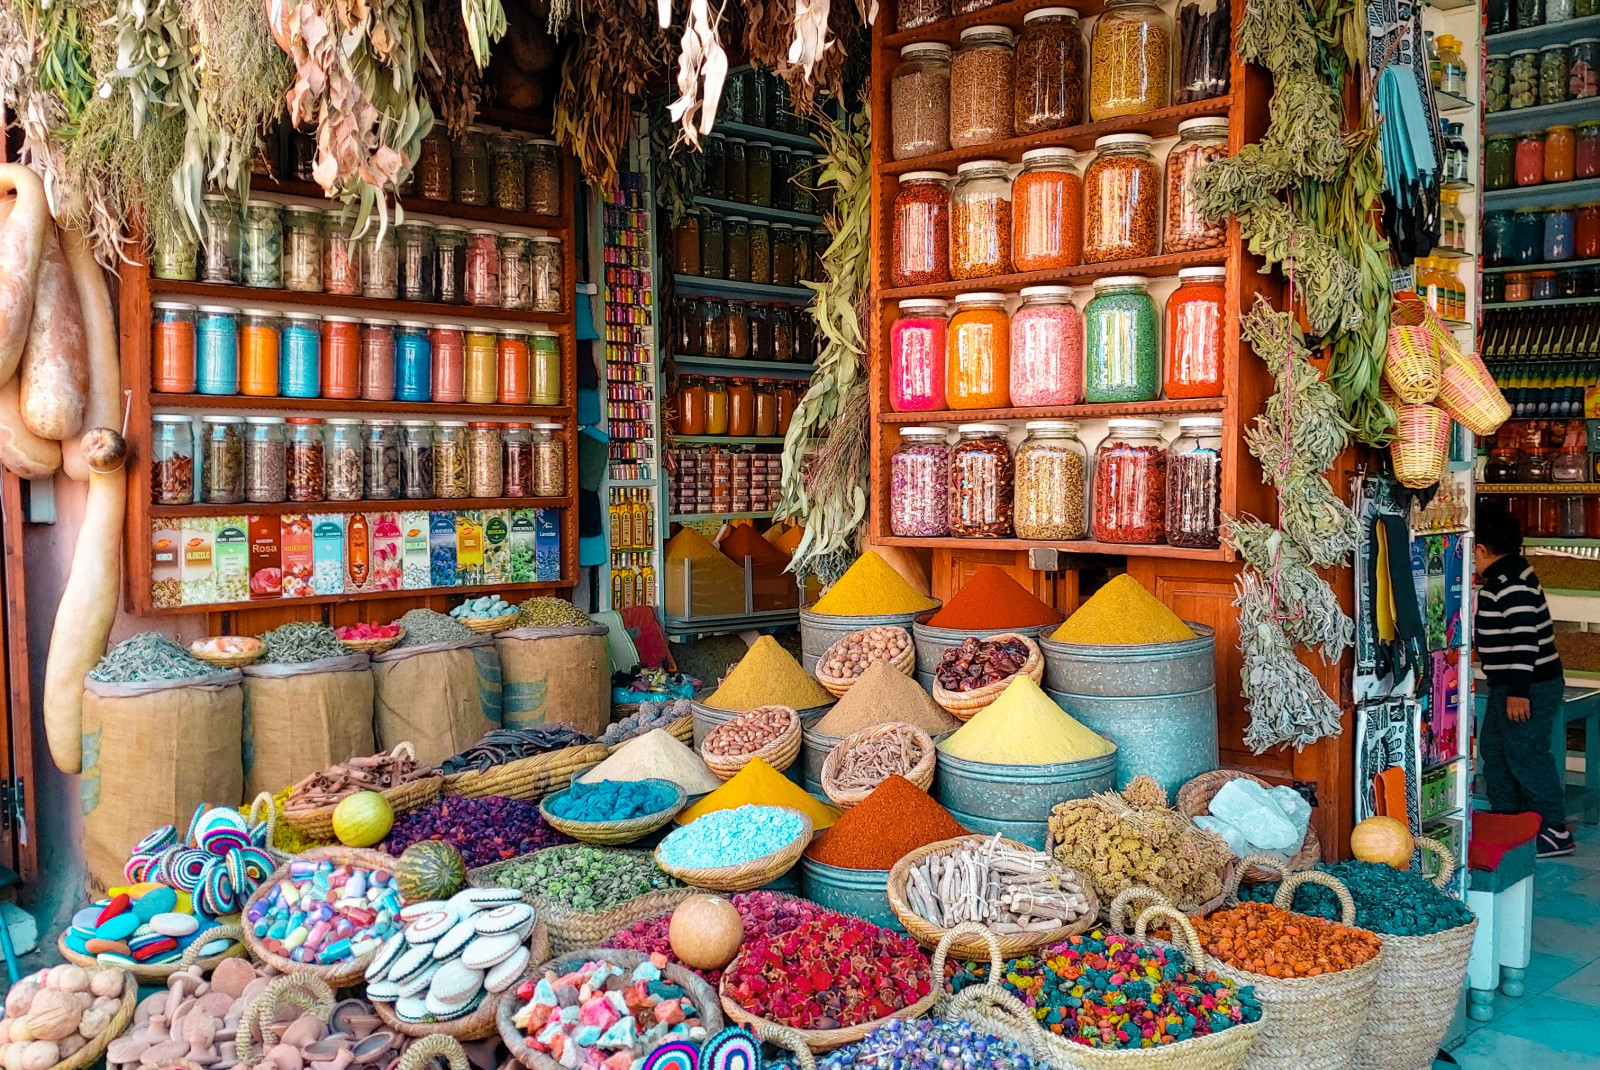 bowls of spices at a market during daytime